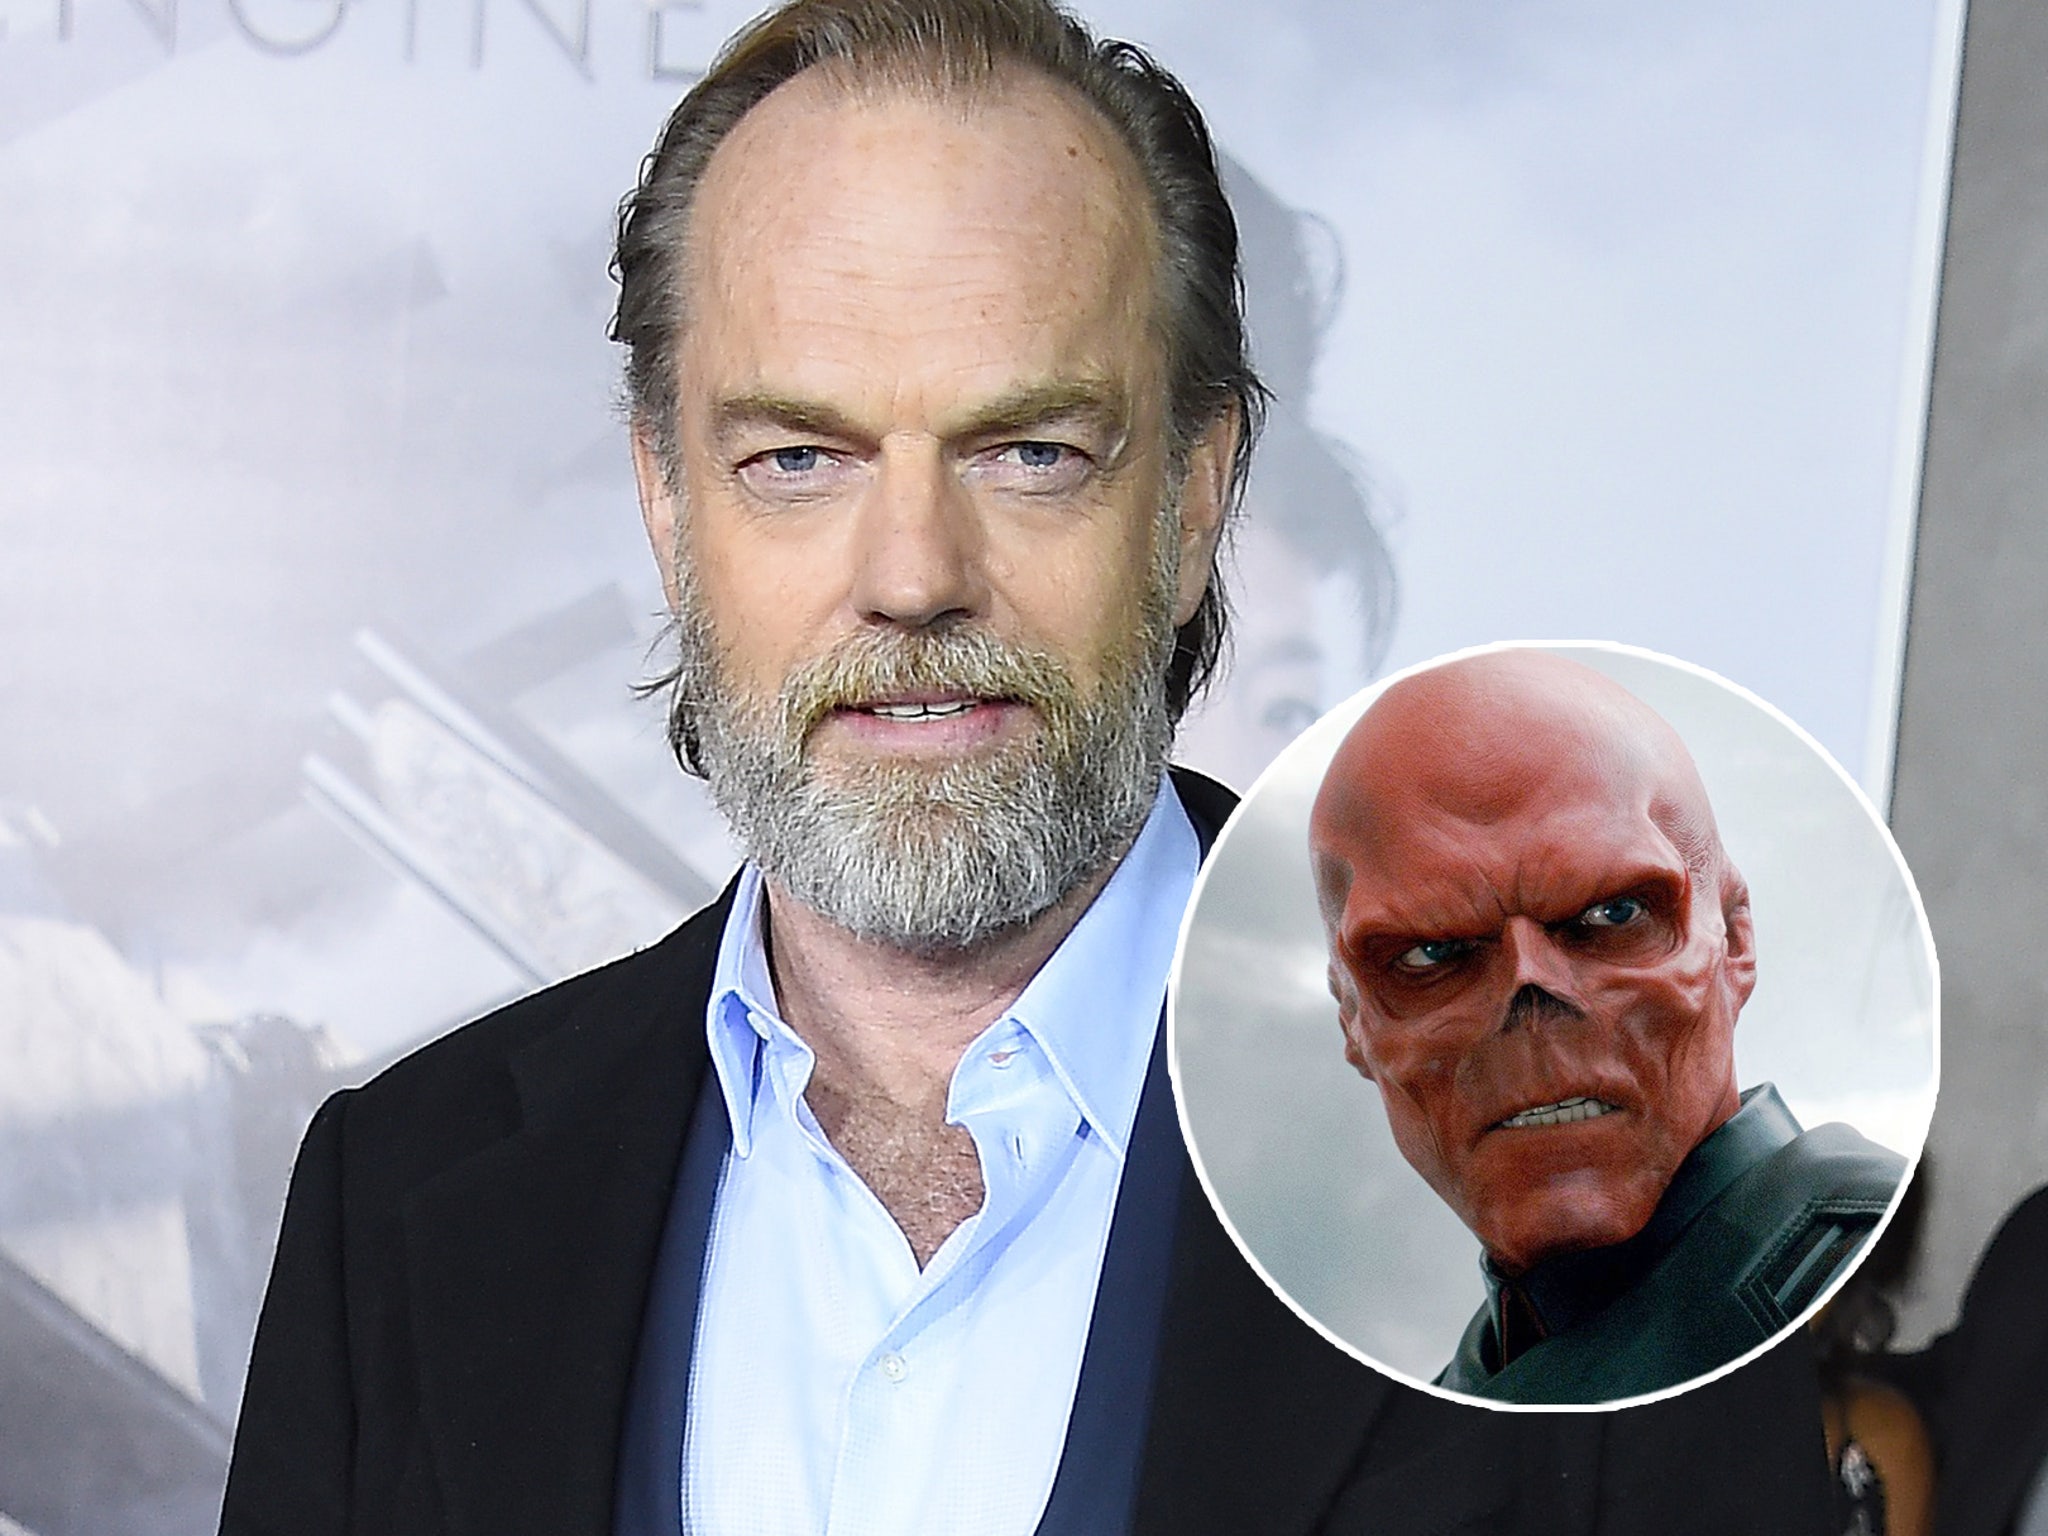 Hugo Weaving explains why he didn't play Red Skull in Avengers sequels